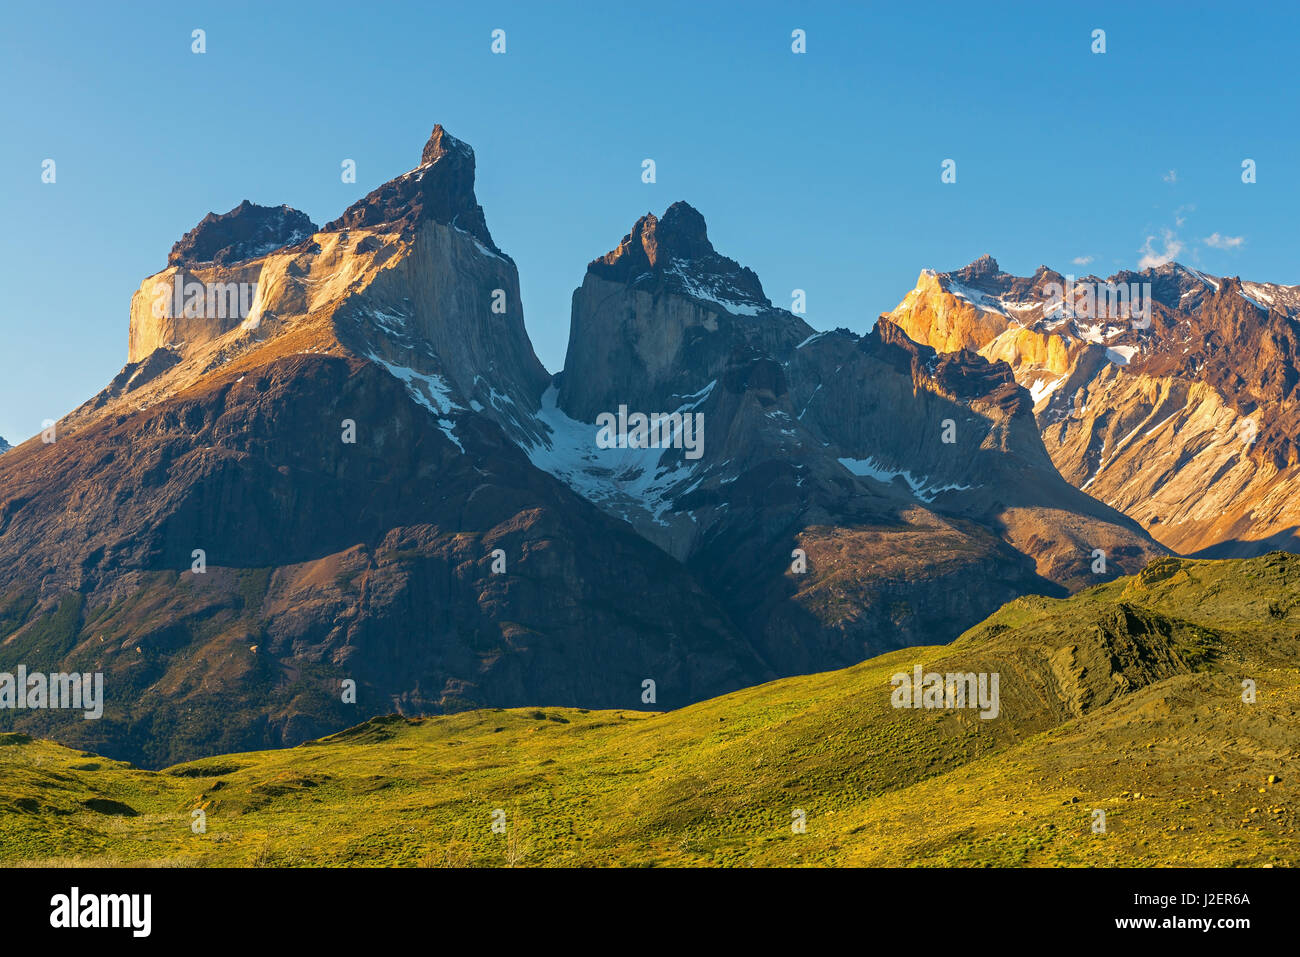 The Andes mountain peaks of the Cuernos del Paine inside the Torres del Paine national park at sunset near Puerto Natales, Patagonia, Chile. Stock Photo